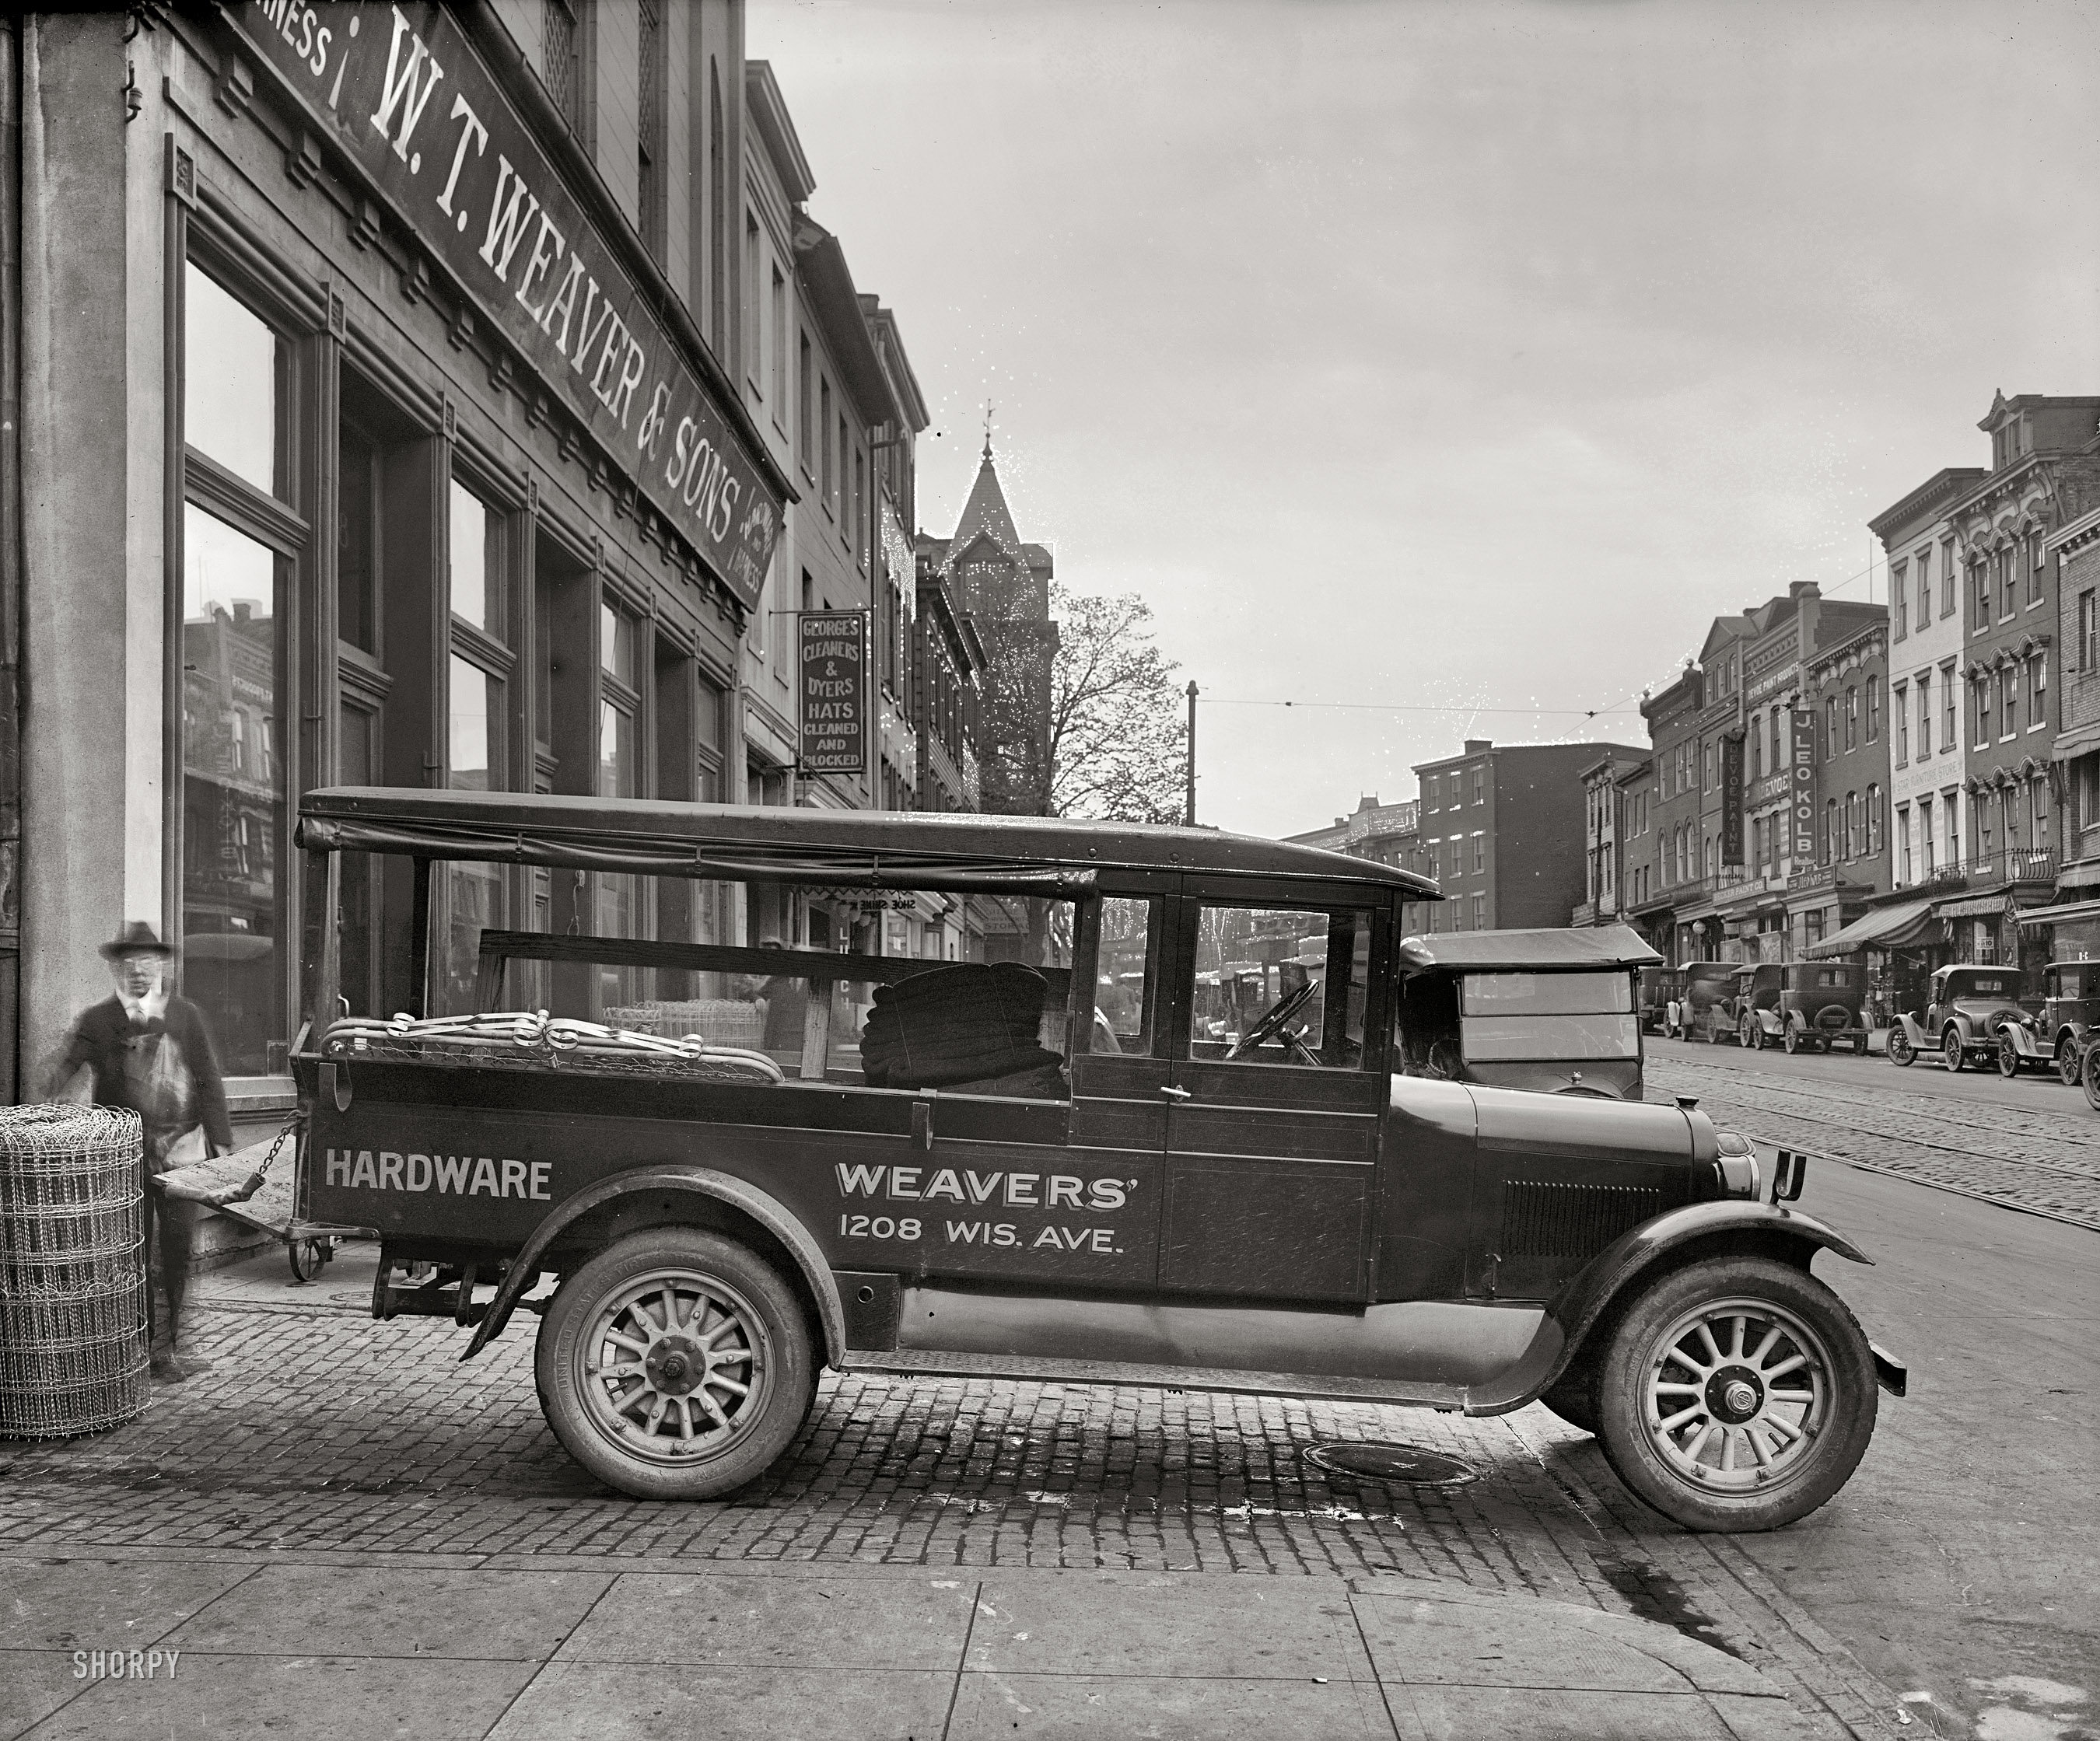 Washington, D.C., 1926. "Semmes Motor Co. -- Weaver truck." And, perhaps, Mr. Weaver. National Photo Company Collection glass negative. View full size.